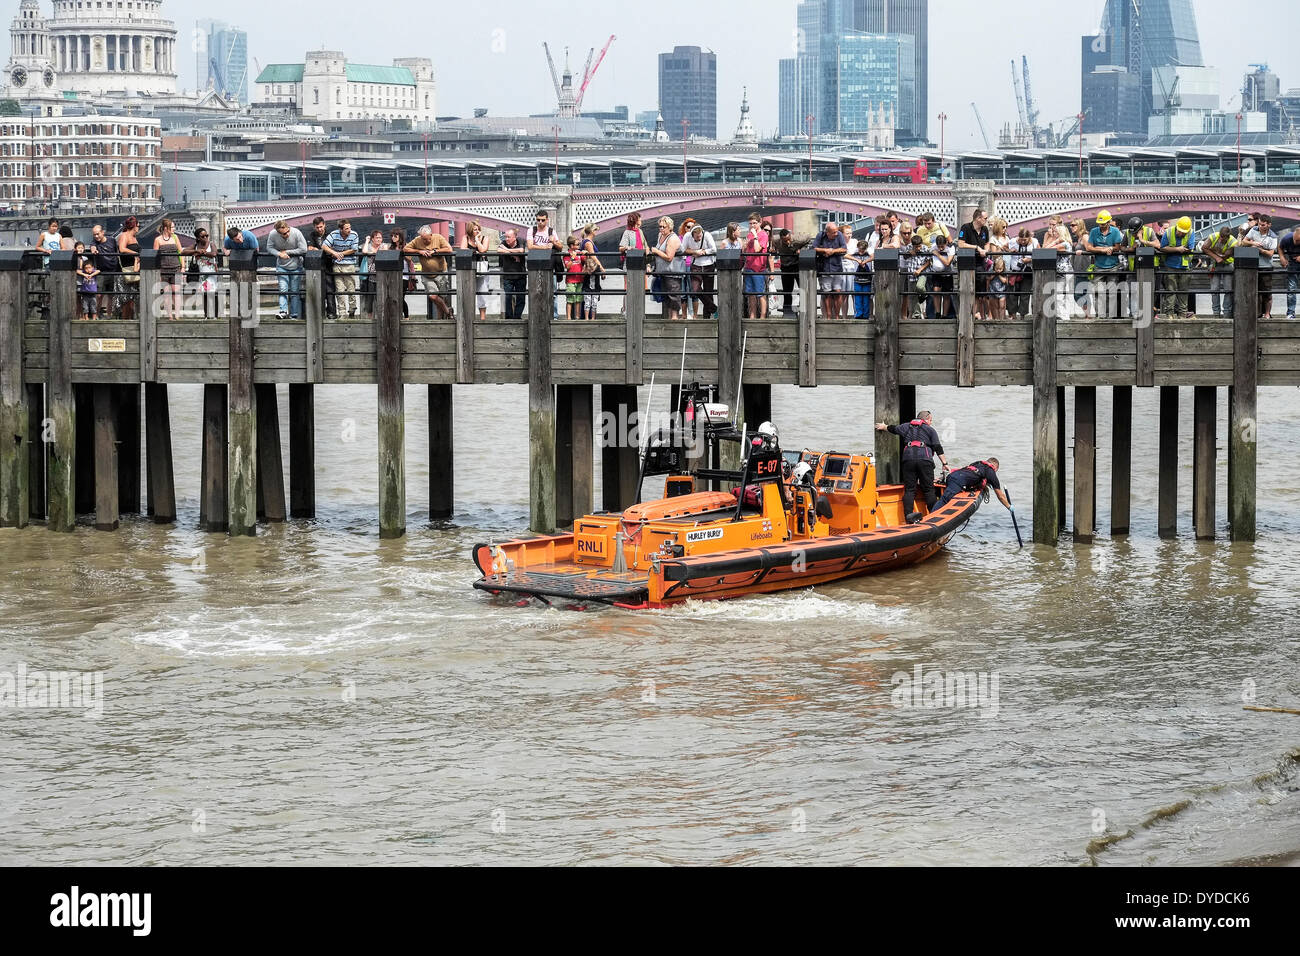 Members of the public watch the crew of the RNLI boat Hurley Burly search the River Thames for a body. Stock Photo